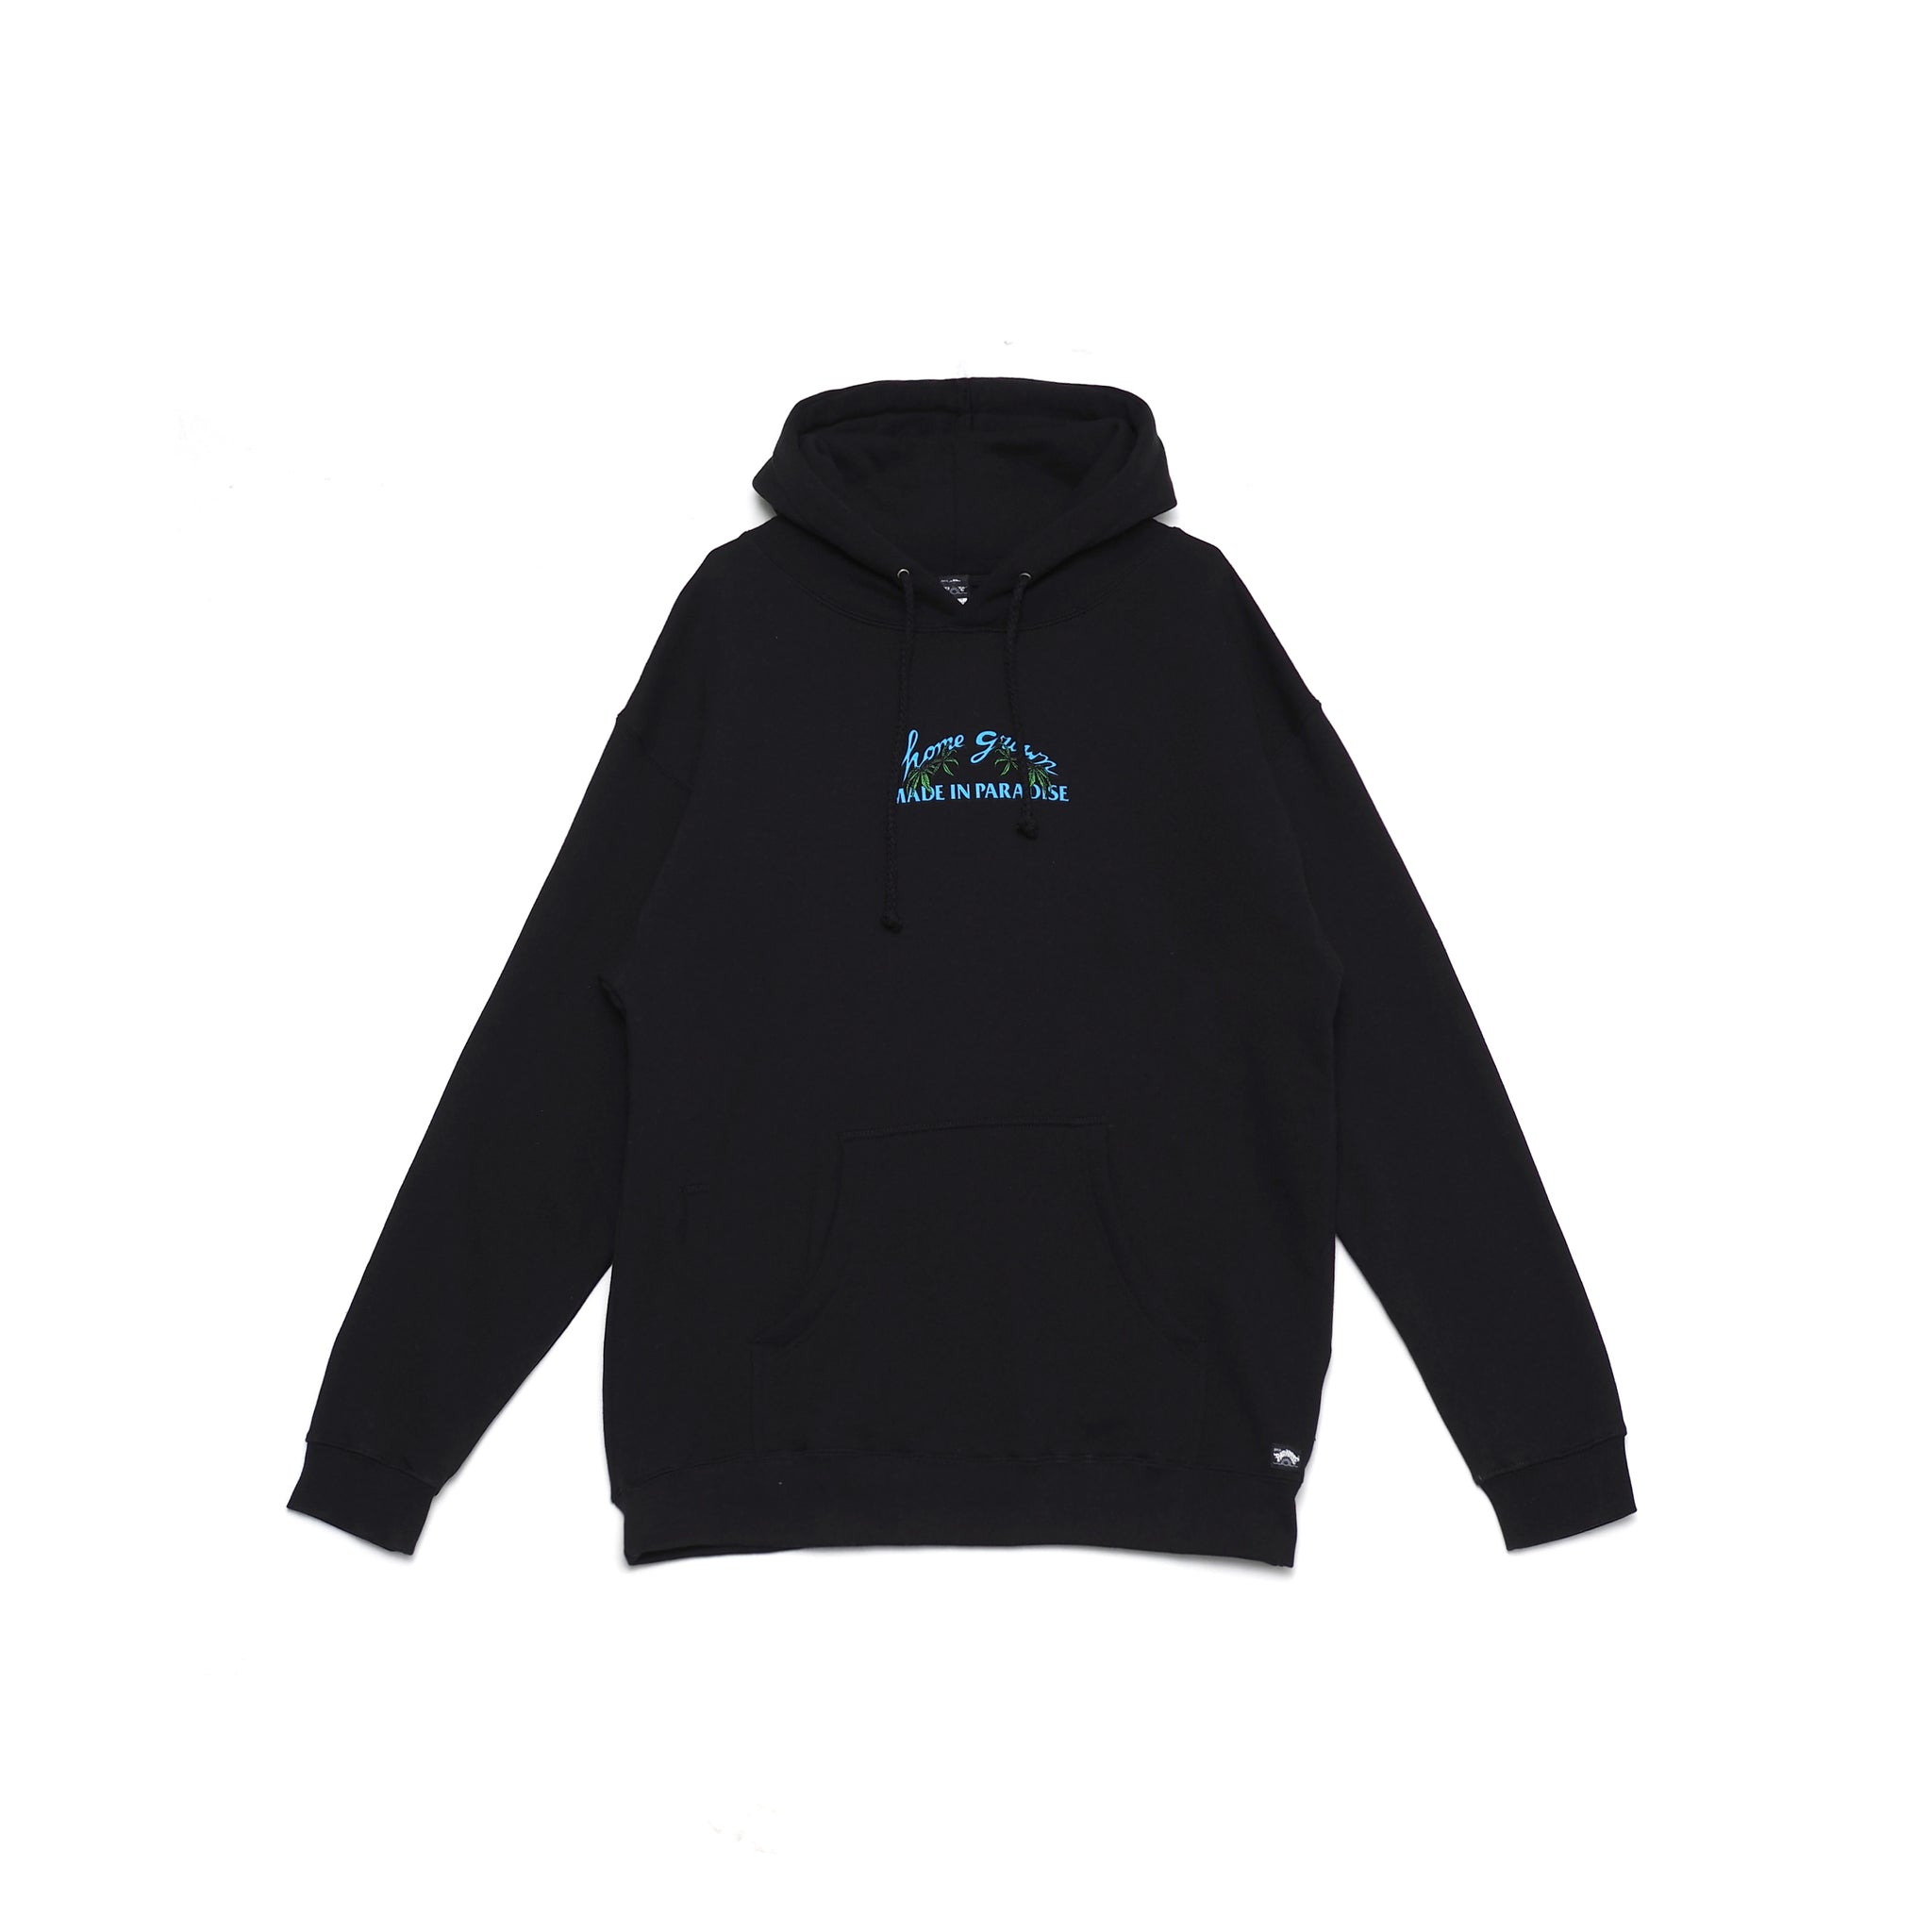 Front view of Made in Paradise Homegrown Collection "HOME GROWN" black hoodie